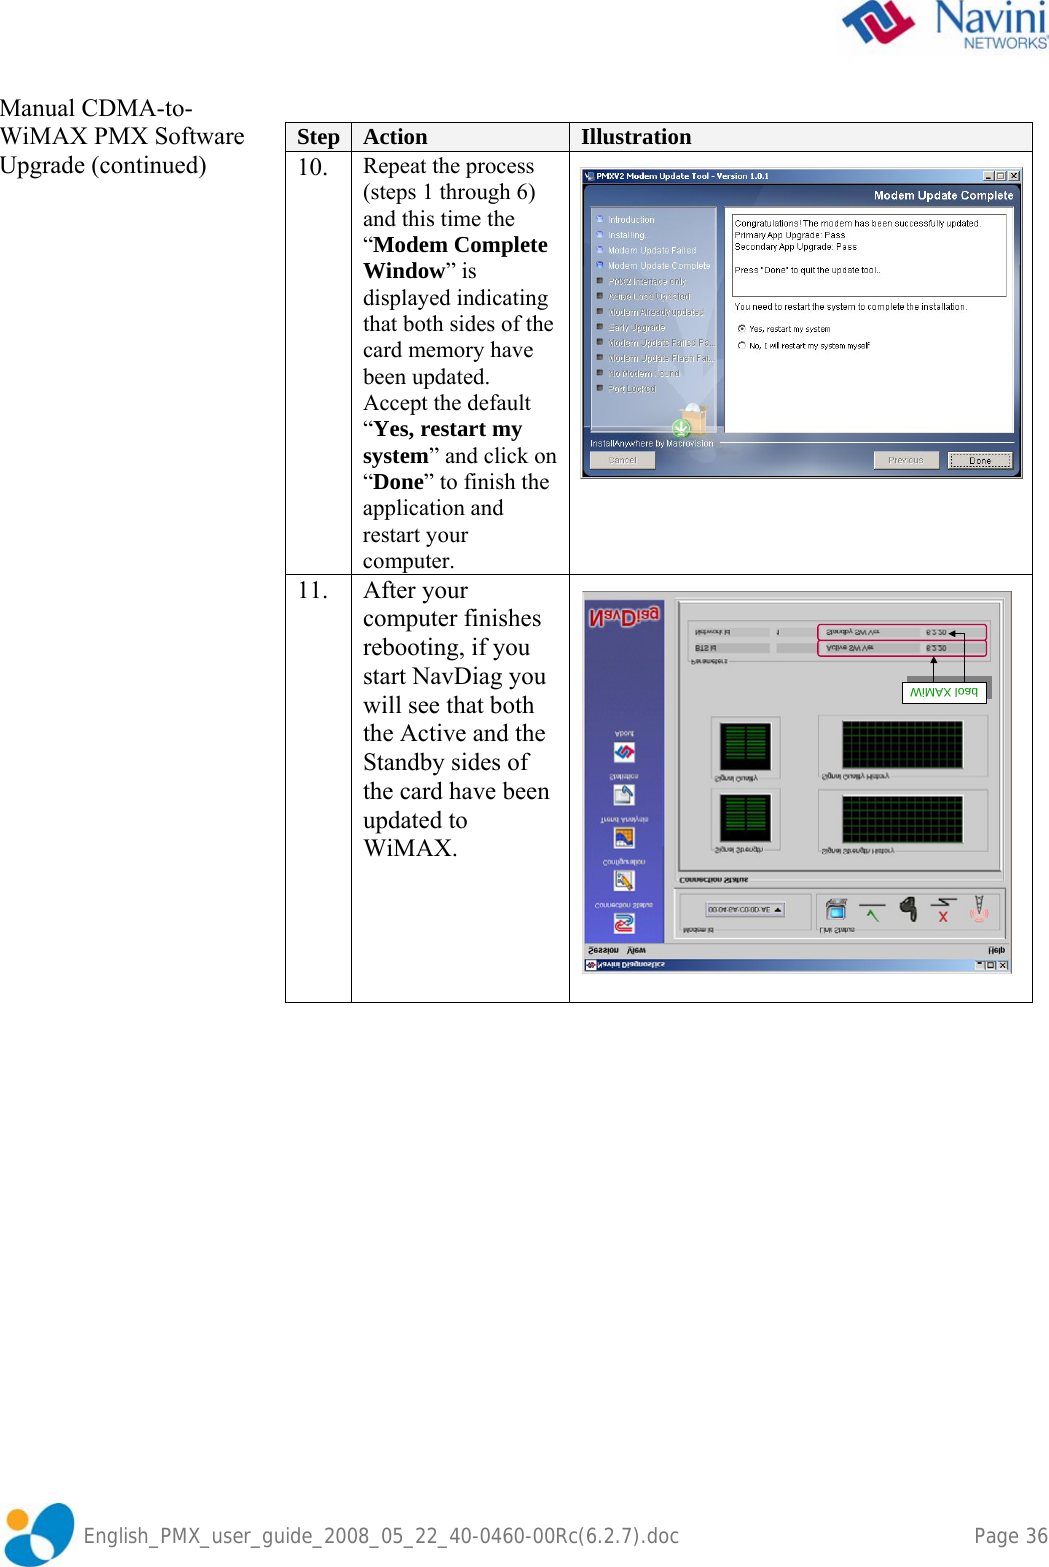               English_PMX_user_guide_2008_05_22_40-0460-00Rc(6.2.7).doc    Page 36 Manual CDMA-to-WiMAX PMX Software Upgrade (continued)   Step  Action  Illustration 10.  Repeat the process (steps 1 through 6) and this time the “Modem Complete Window” is displayed indicating that both sides of the card memory have been updated.  Accept the default “Yes, restart my system” and click on “Done” to finish the application and restart your computer.  11. After your computer finishes rebooting, if you start NavDiag you will see that both the Active and the Standby sides of the card have been updated to WiMAX.      WiMAX loadWiMAX loadWiMAX loadWiMAX load